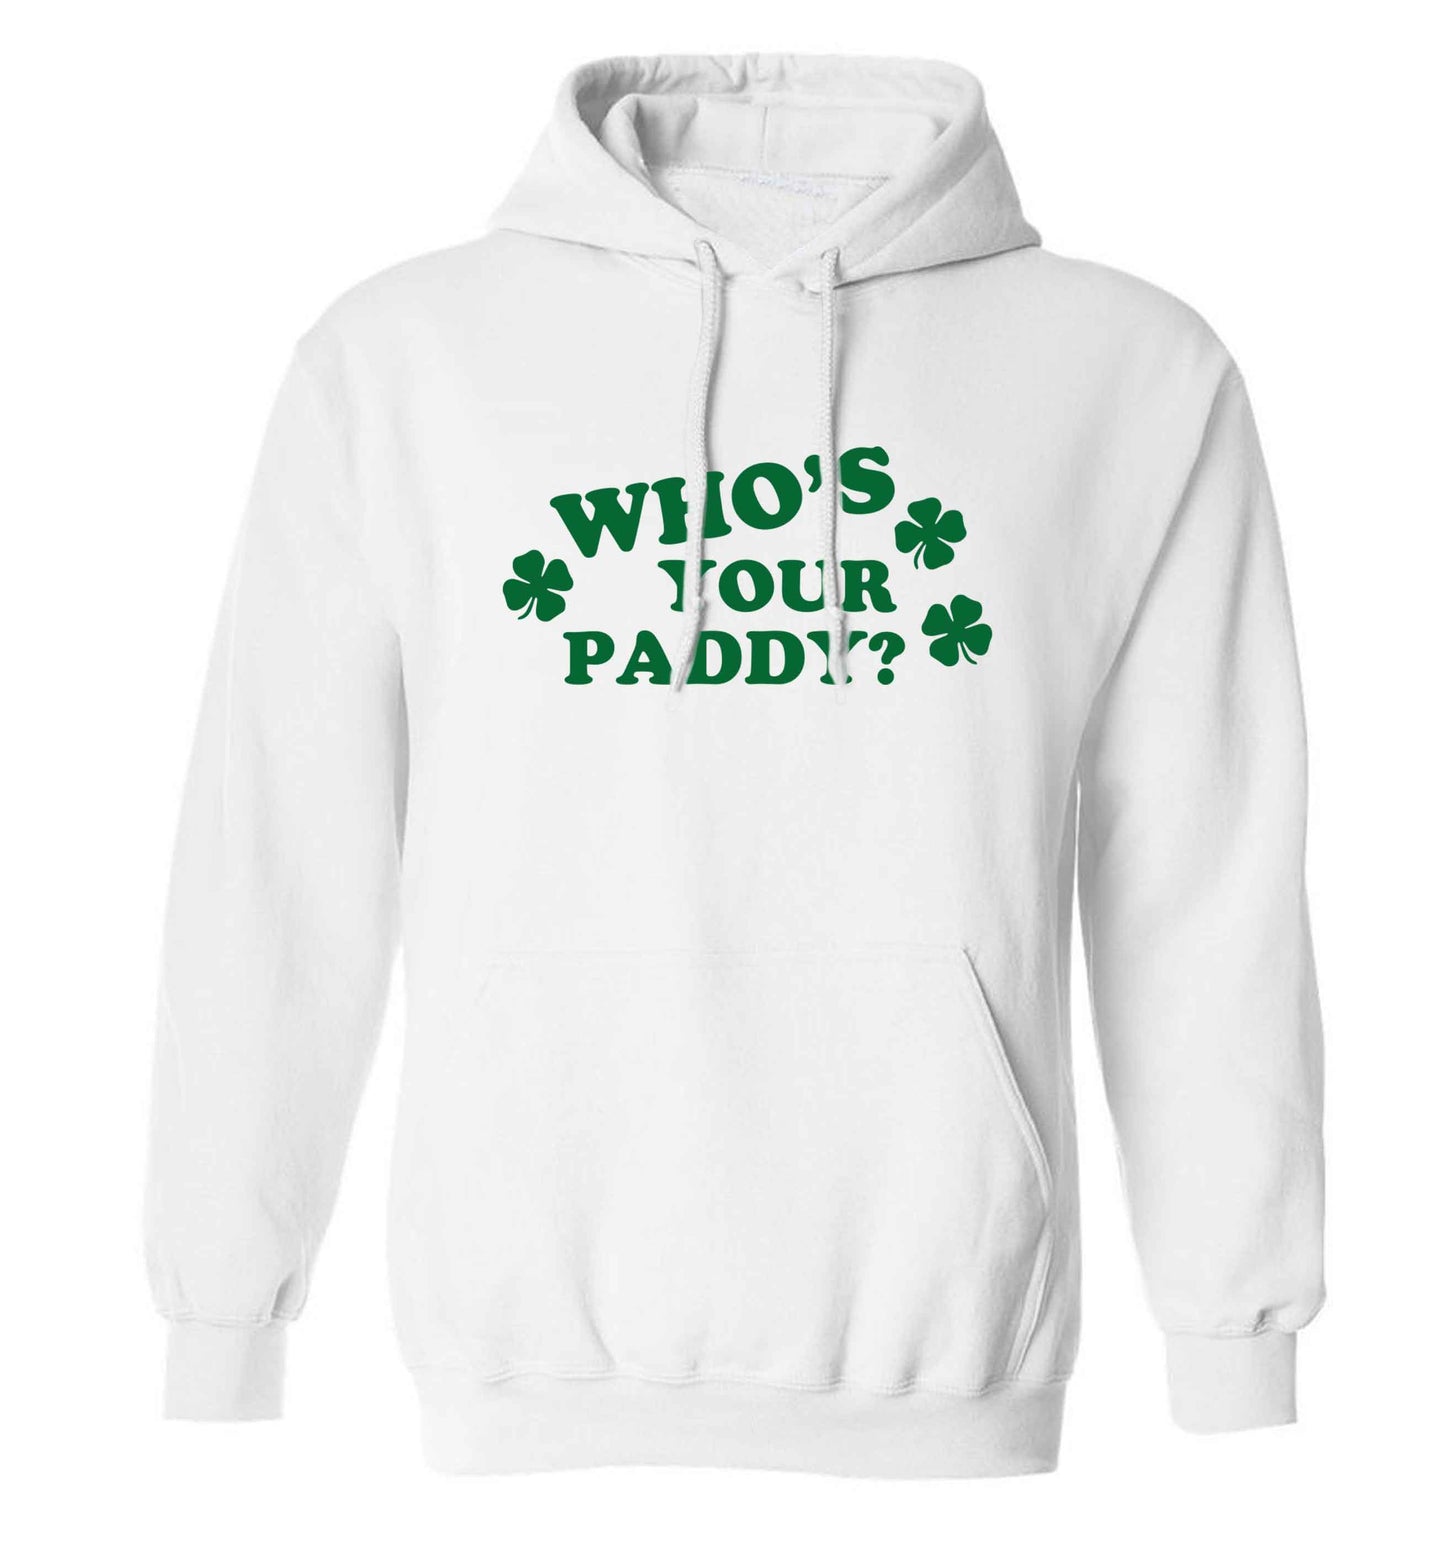 Who's your paddy? adults unisex white hoodie 2XL